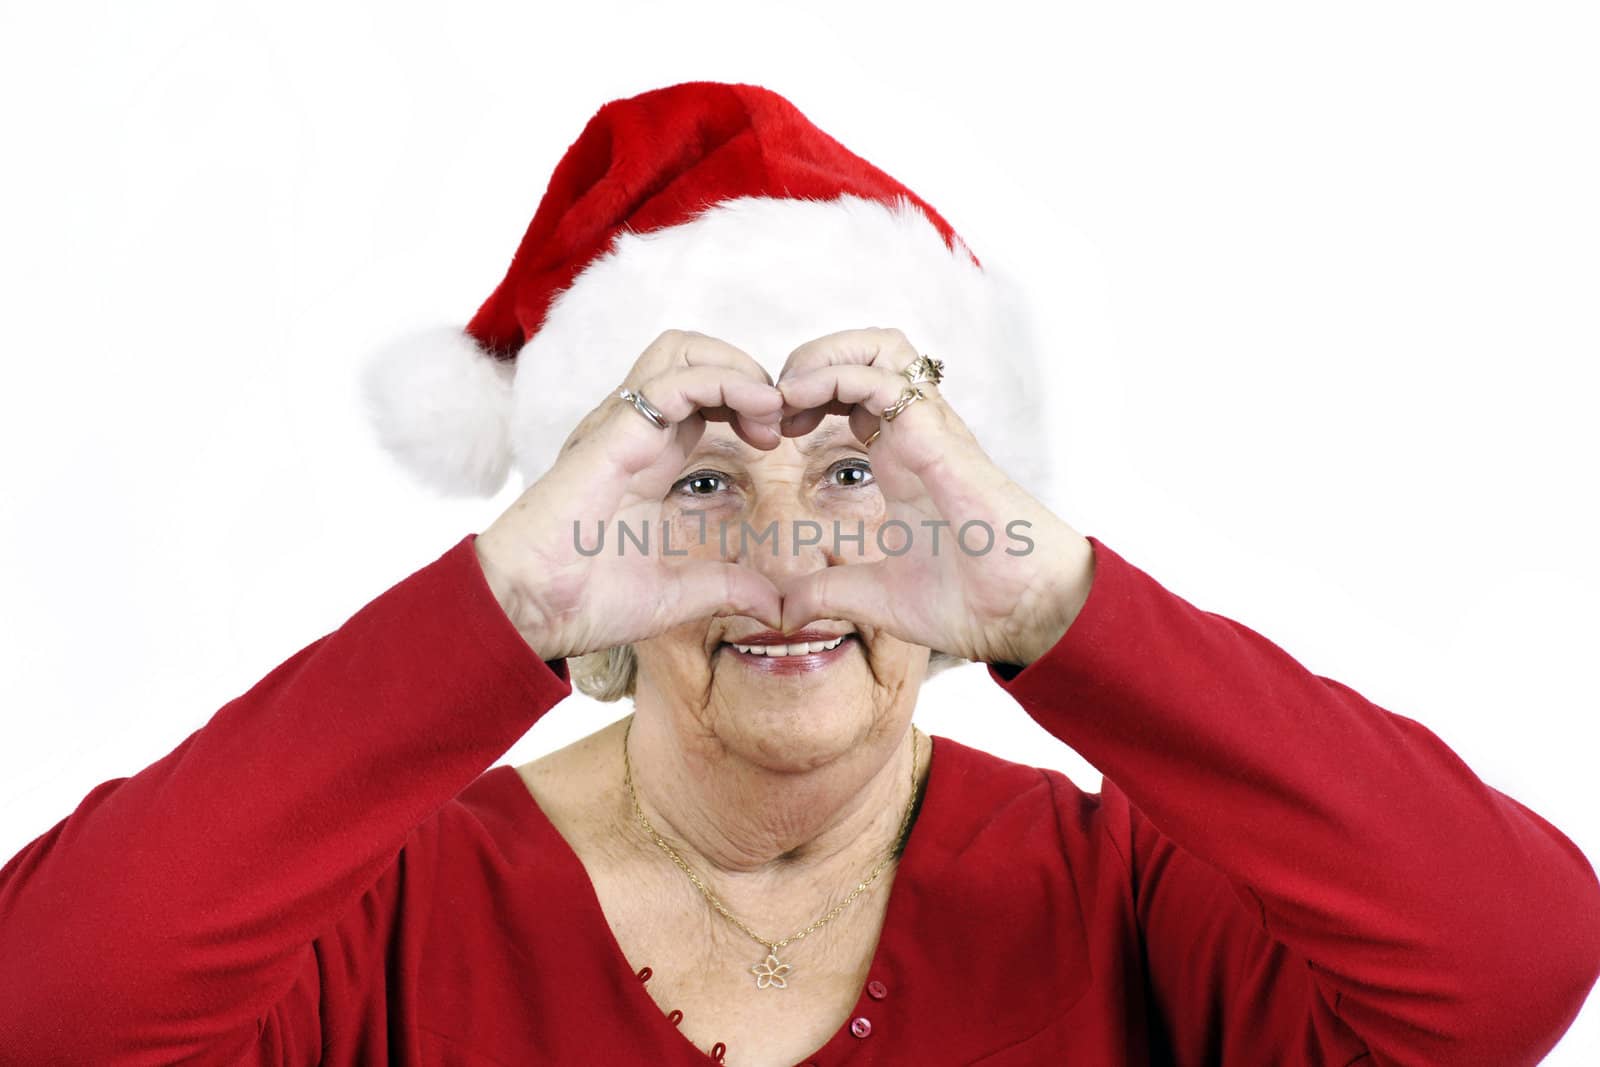 Grandmother sending her love for Christmas by making a heart shape with her hands while wearing Santa Claus hat.